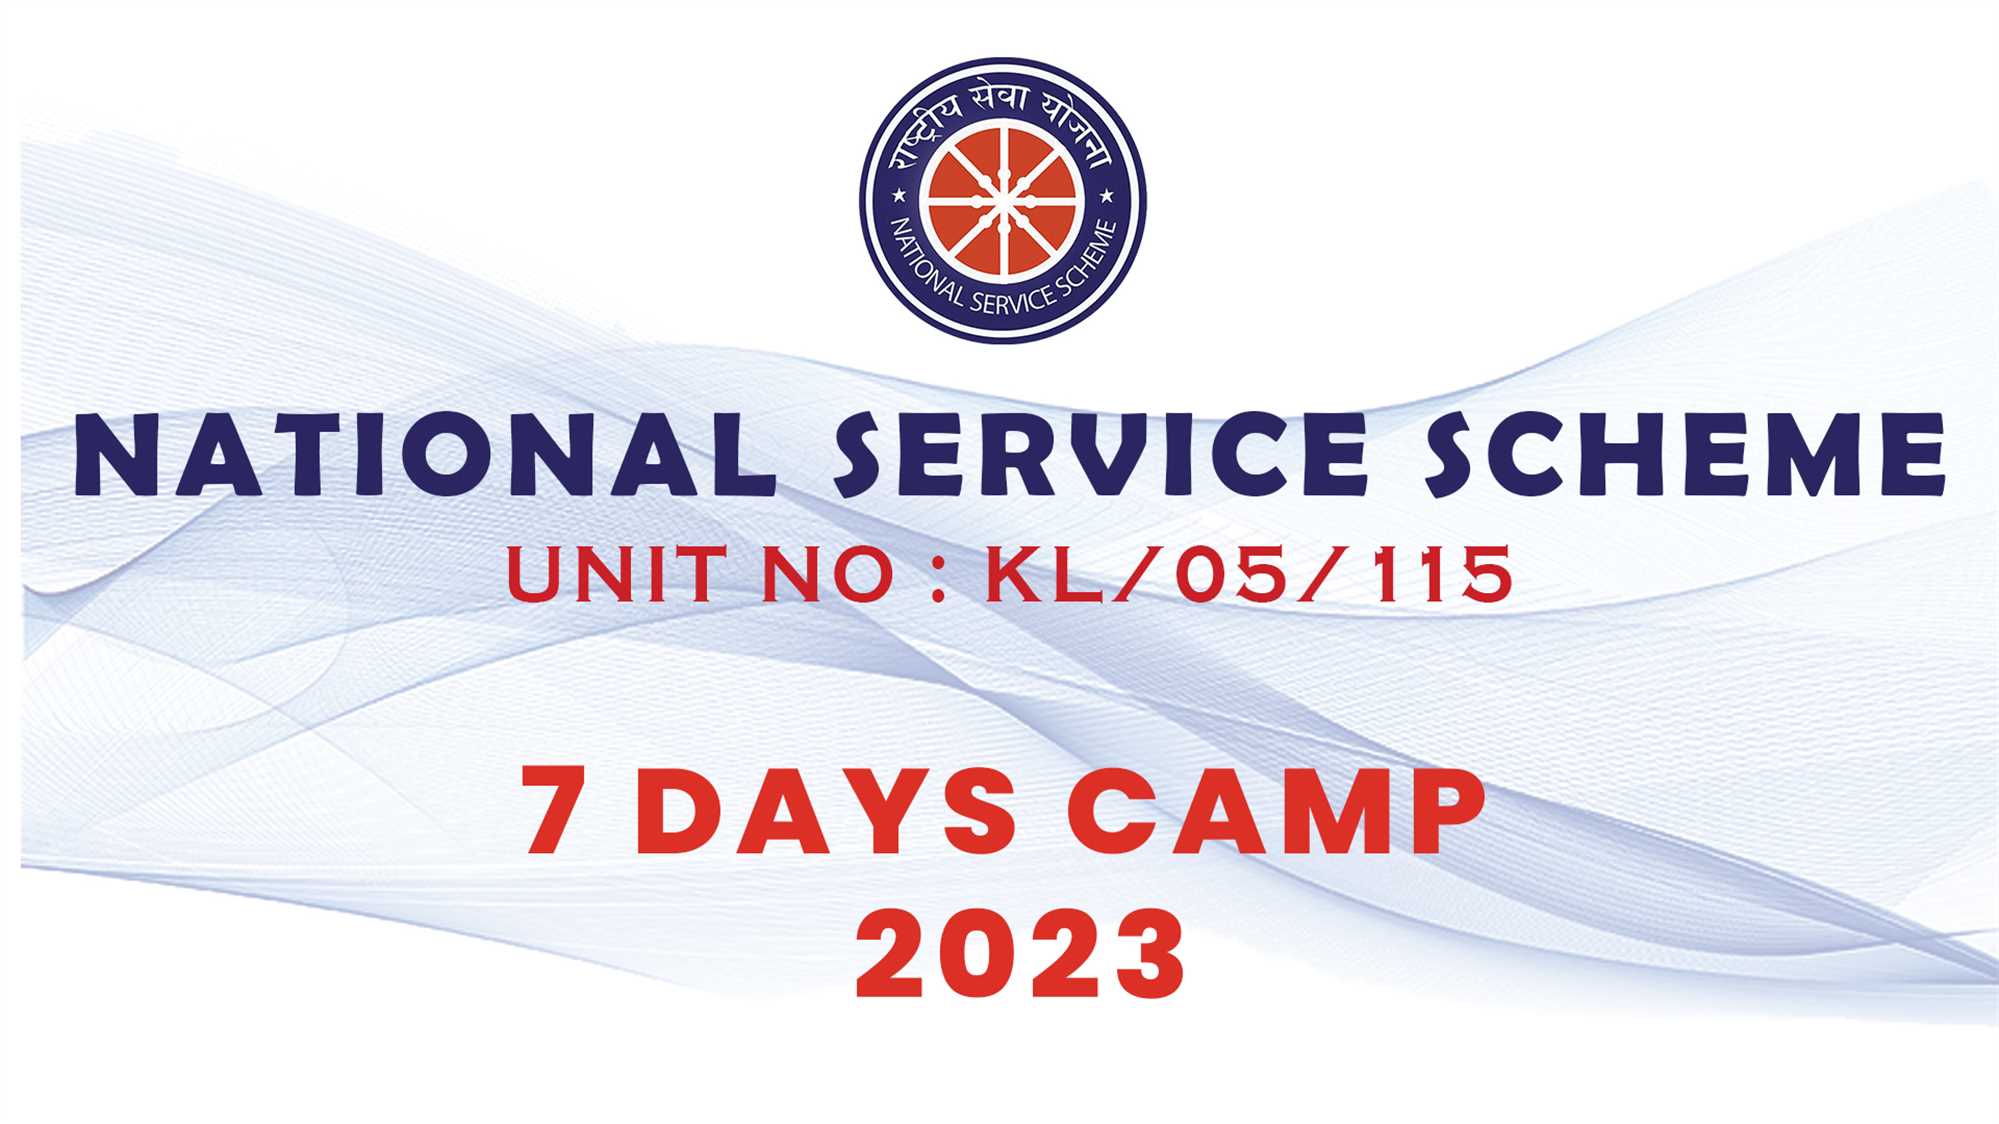 NSS 7 DAYS CAMP 2023